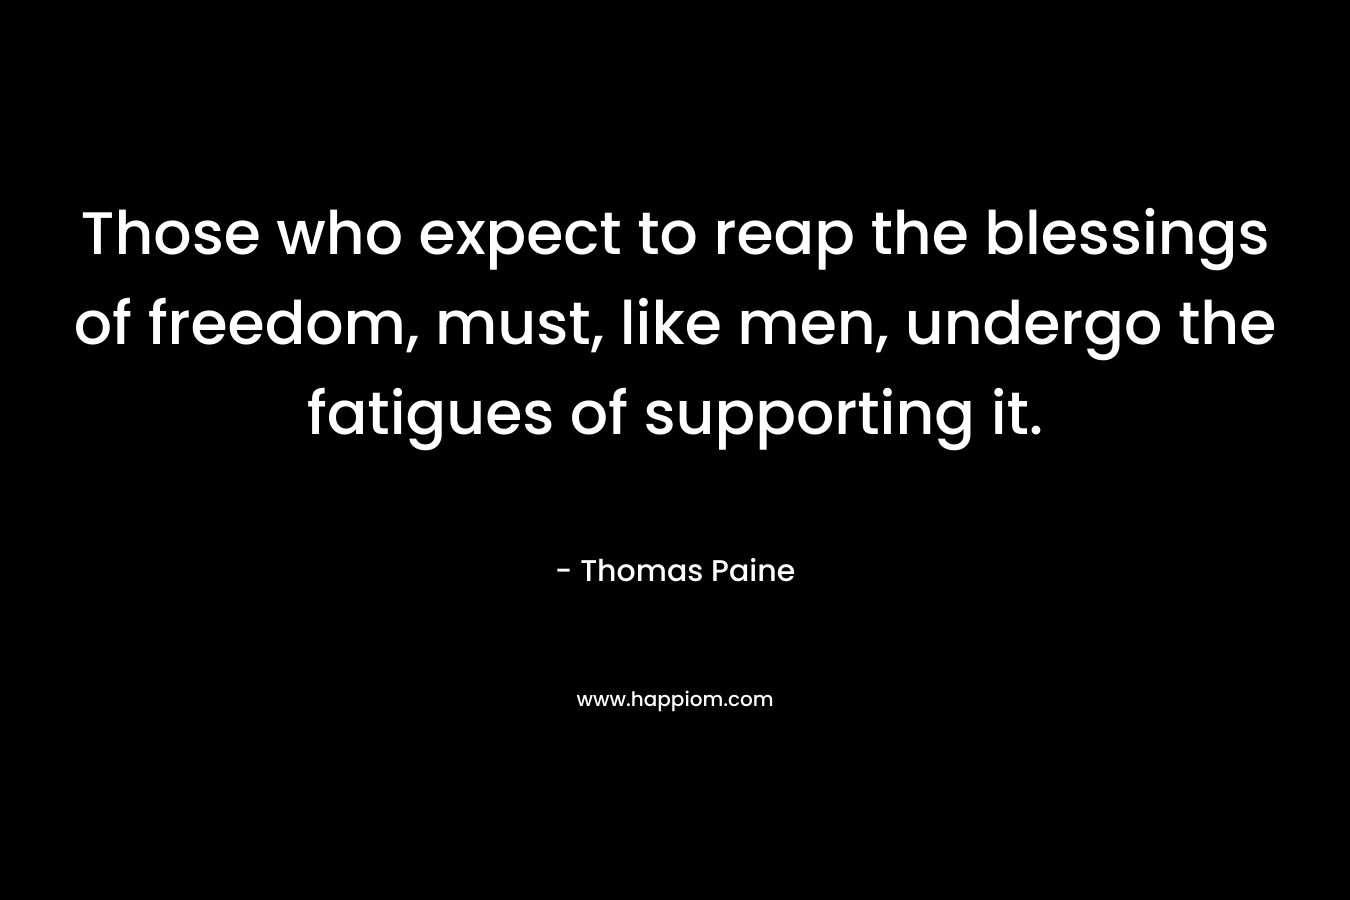 Those who expect to reap the blessings of freedom, must, like men, undergo the fatigues of supporting it. – Thomas Paine